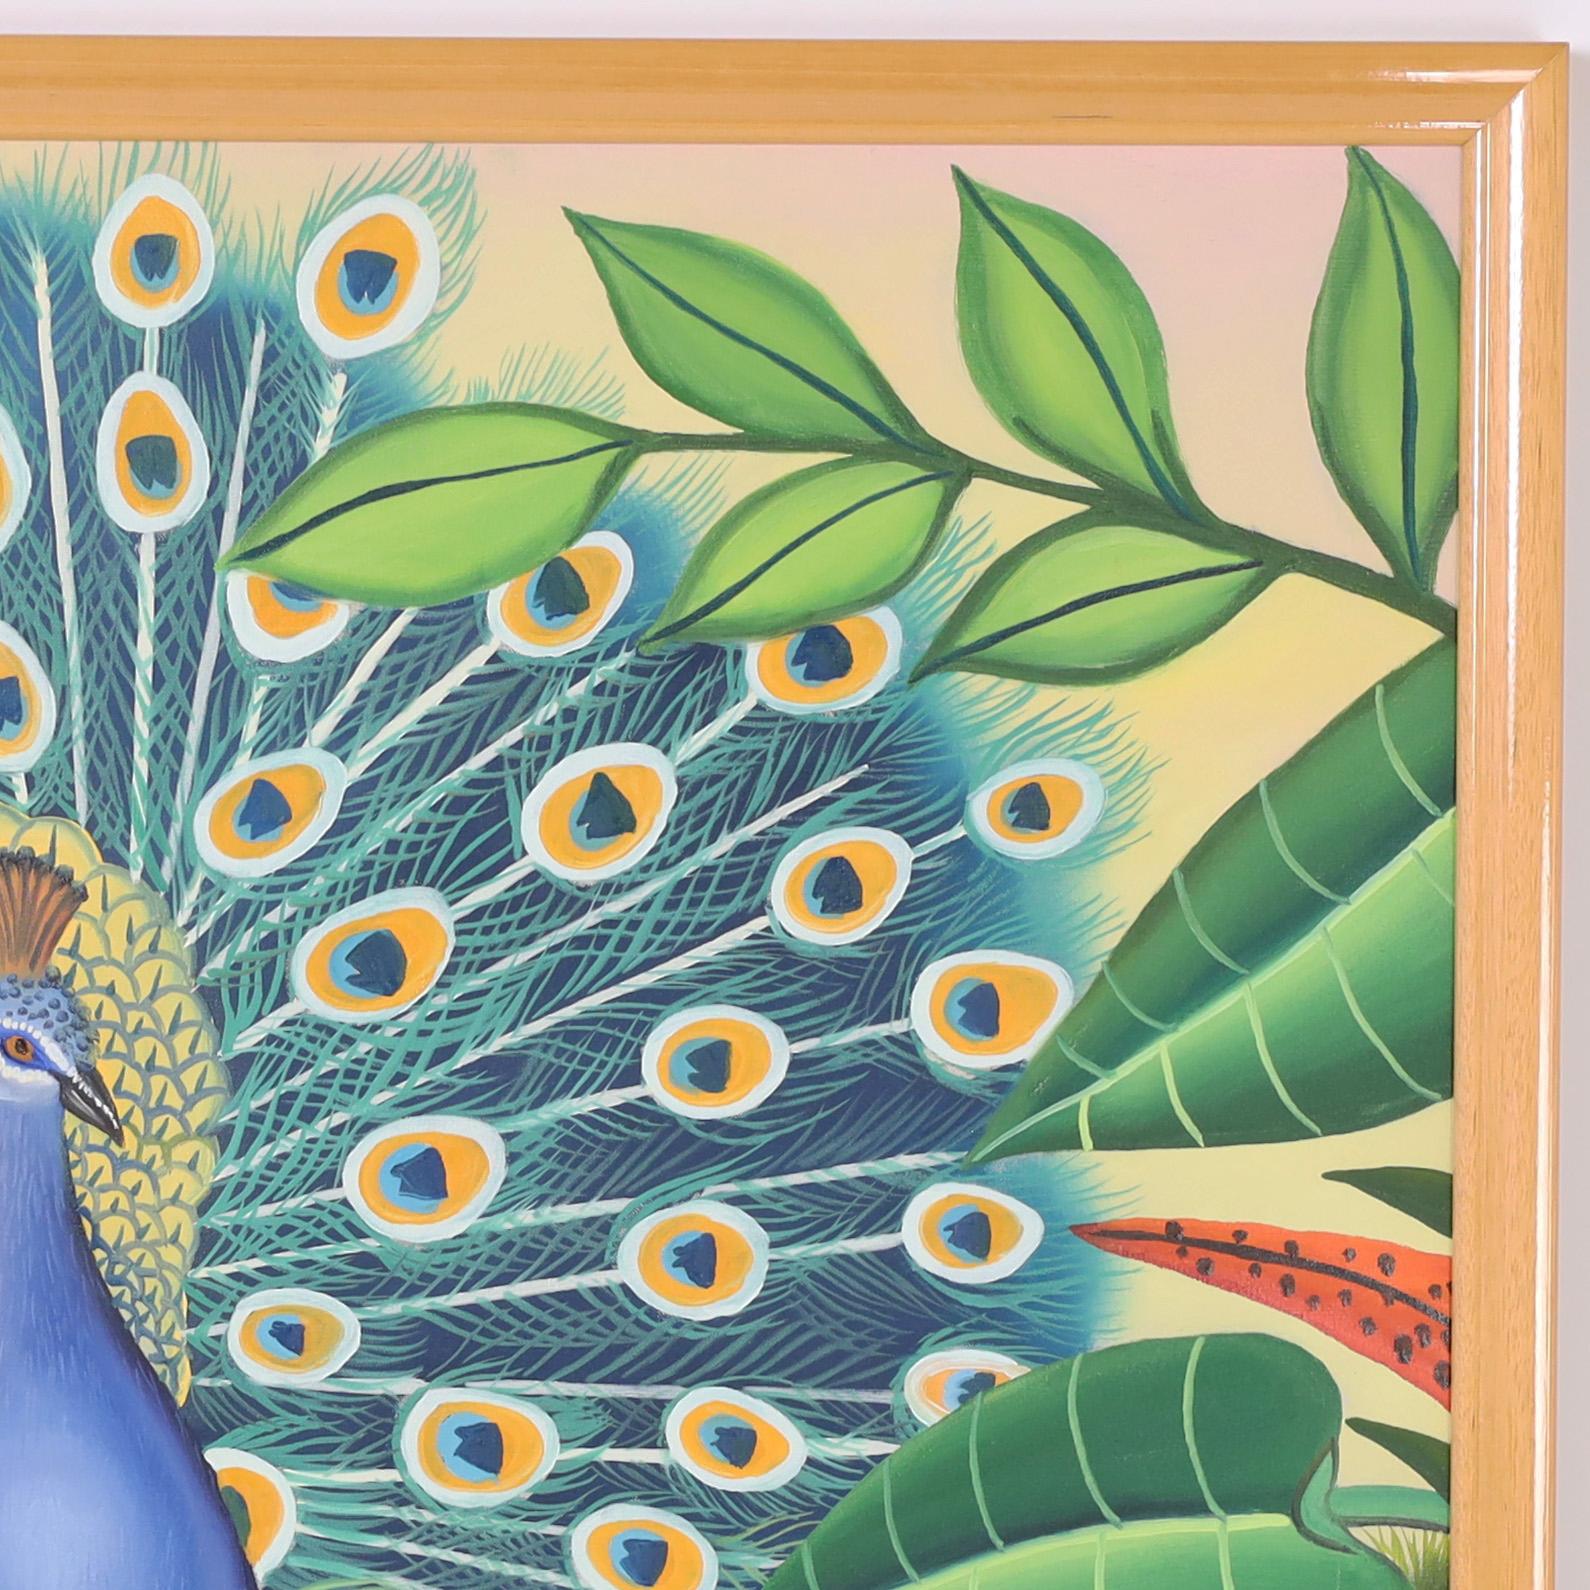 Branko Paradis Painting on Canvas of a Peacock For Sale 2